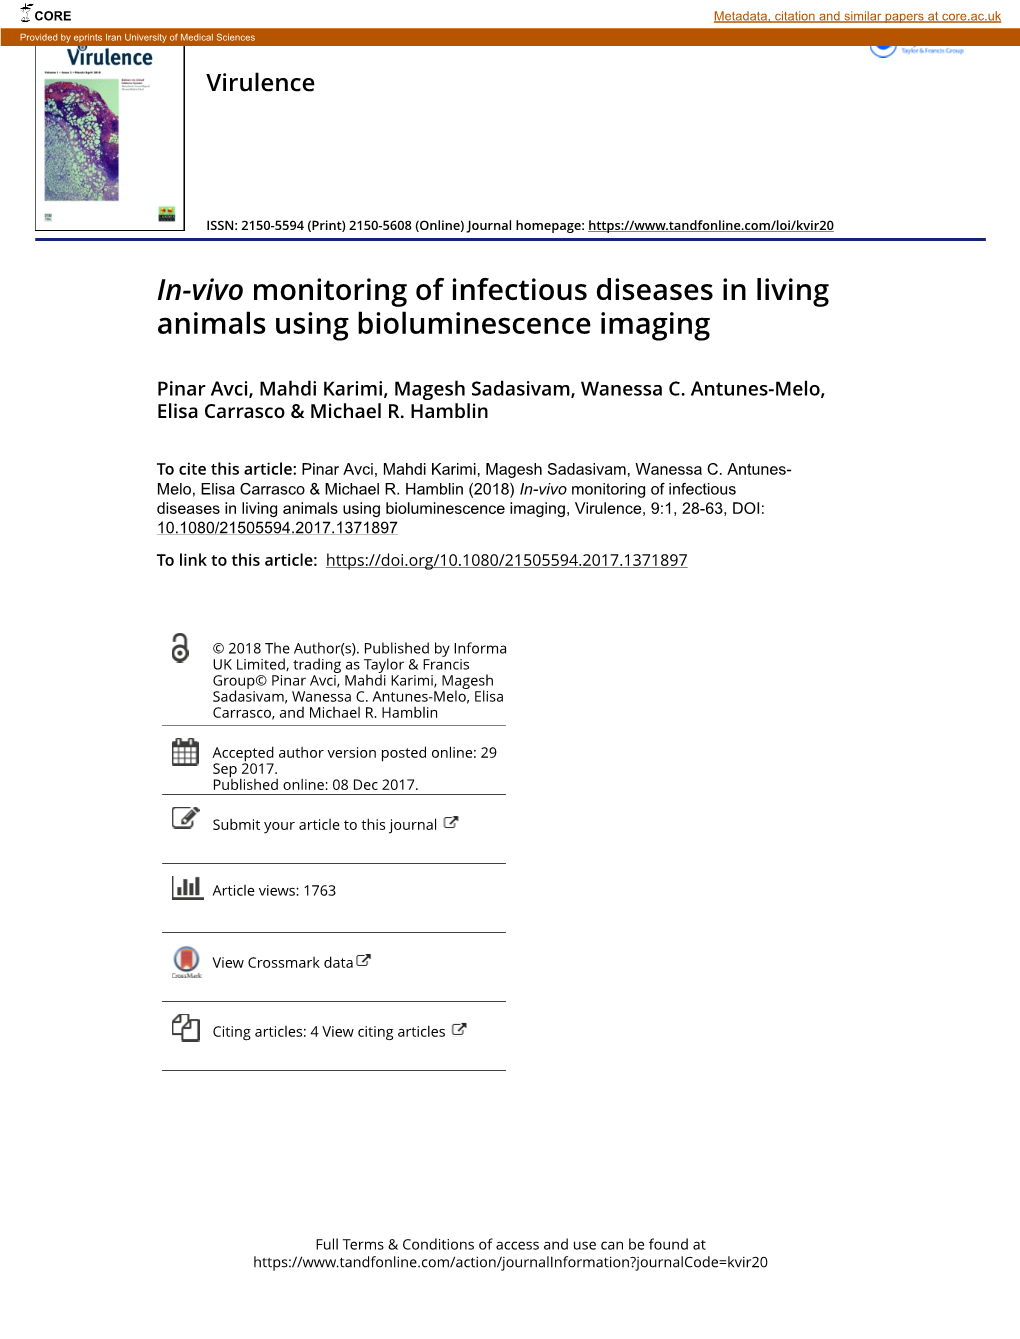 In-Vivo Monitoring of Infectious Diseases in Living Animals Using Bioluminescence Imaging